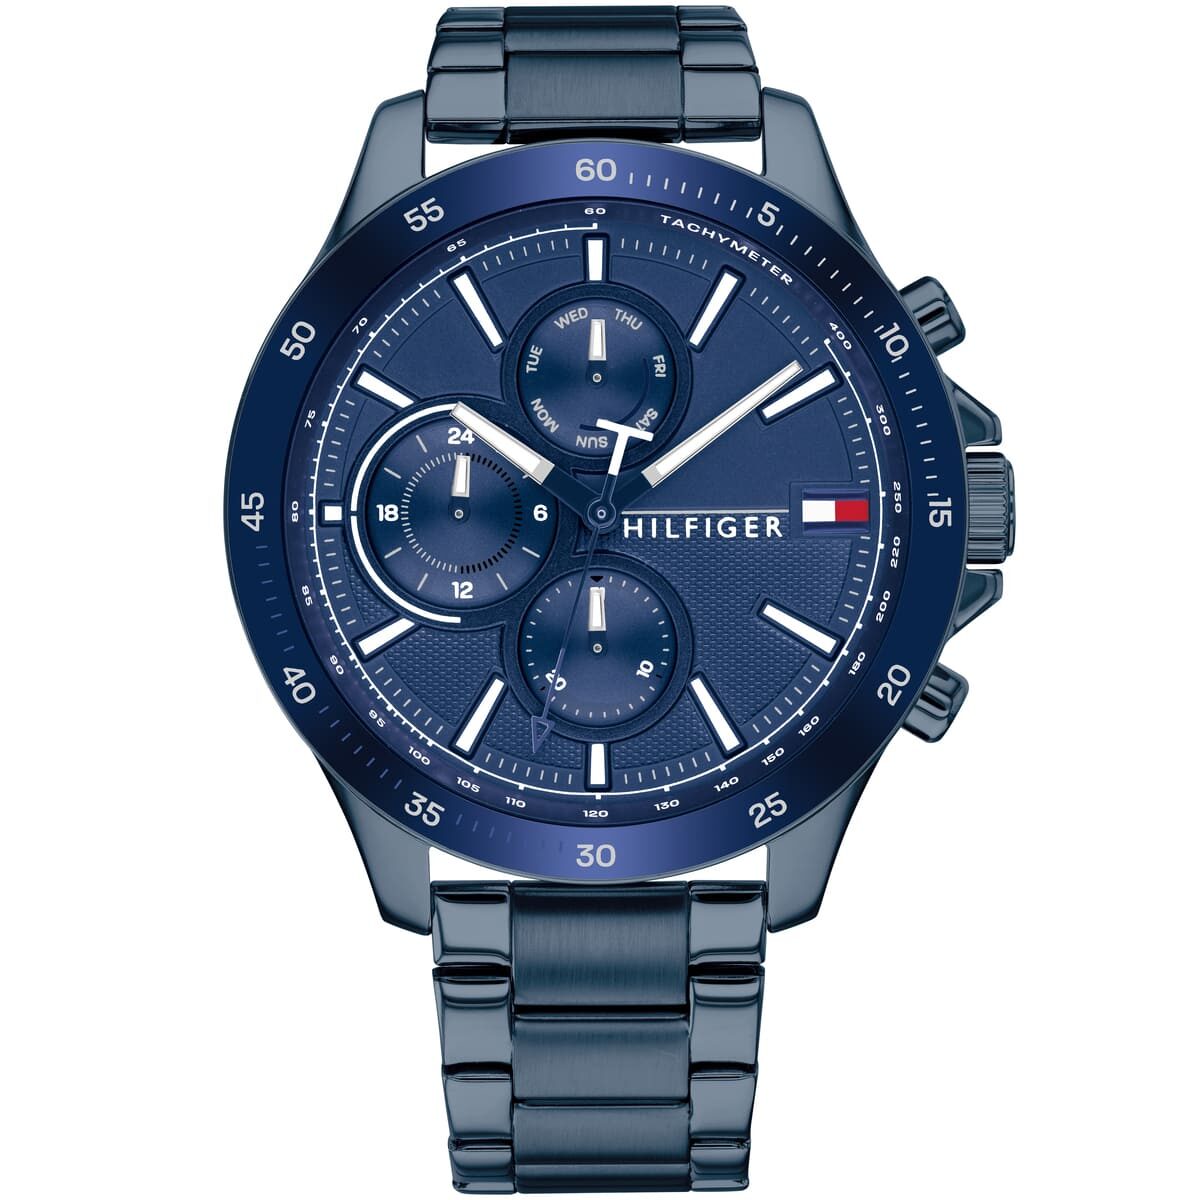 1791720-tommy-hilfiger-watch-men-blue-dial-stainless-steel-metal-strap-quartz-analog-day-date-month-bank